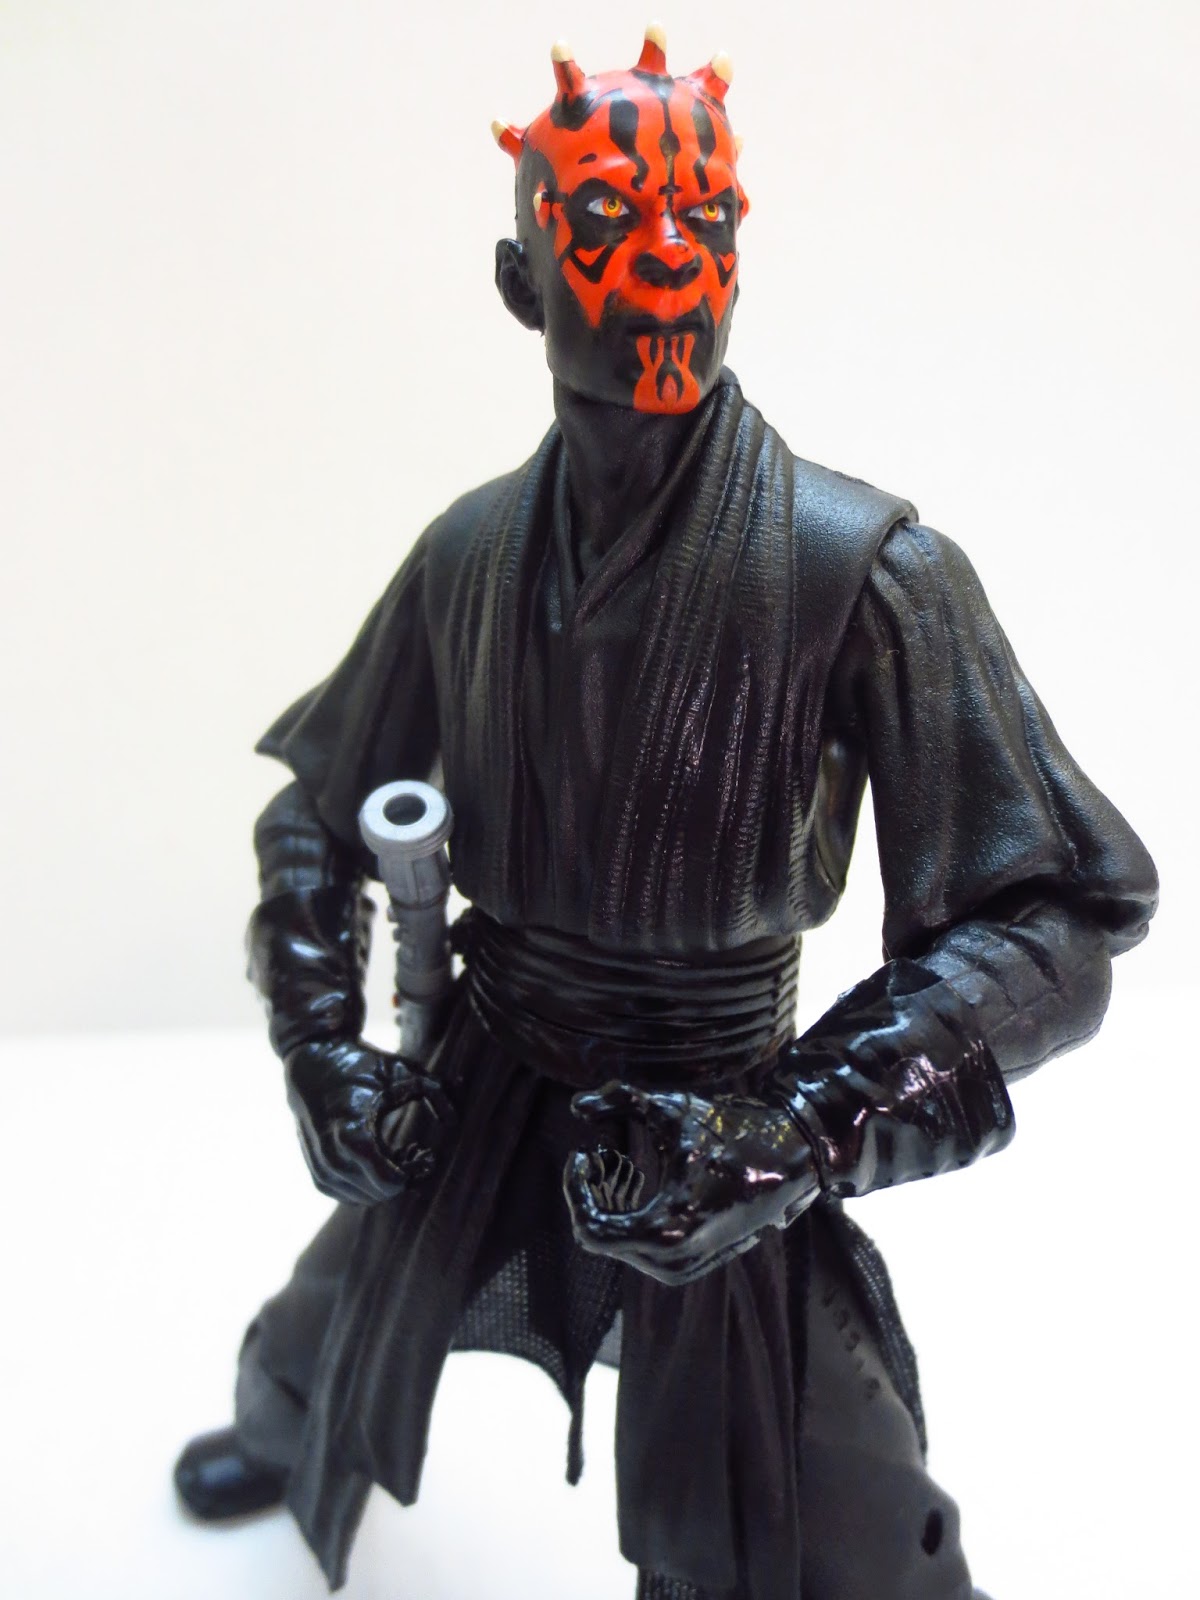 Lake Taupo Se venligst Jabeth Wilson Action Figure Review: Darth Maul from Star Wars Black by Hasbro (Great)